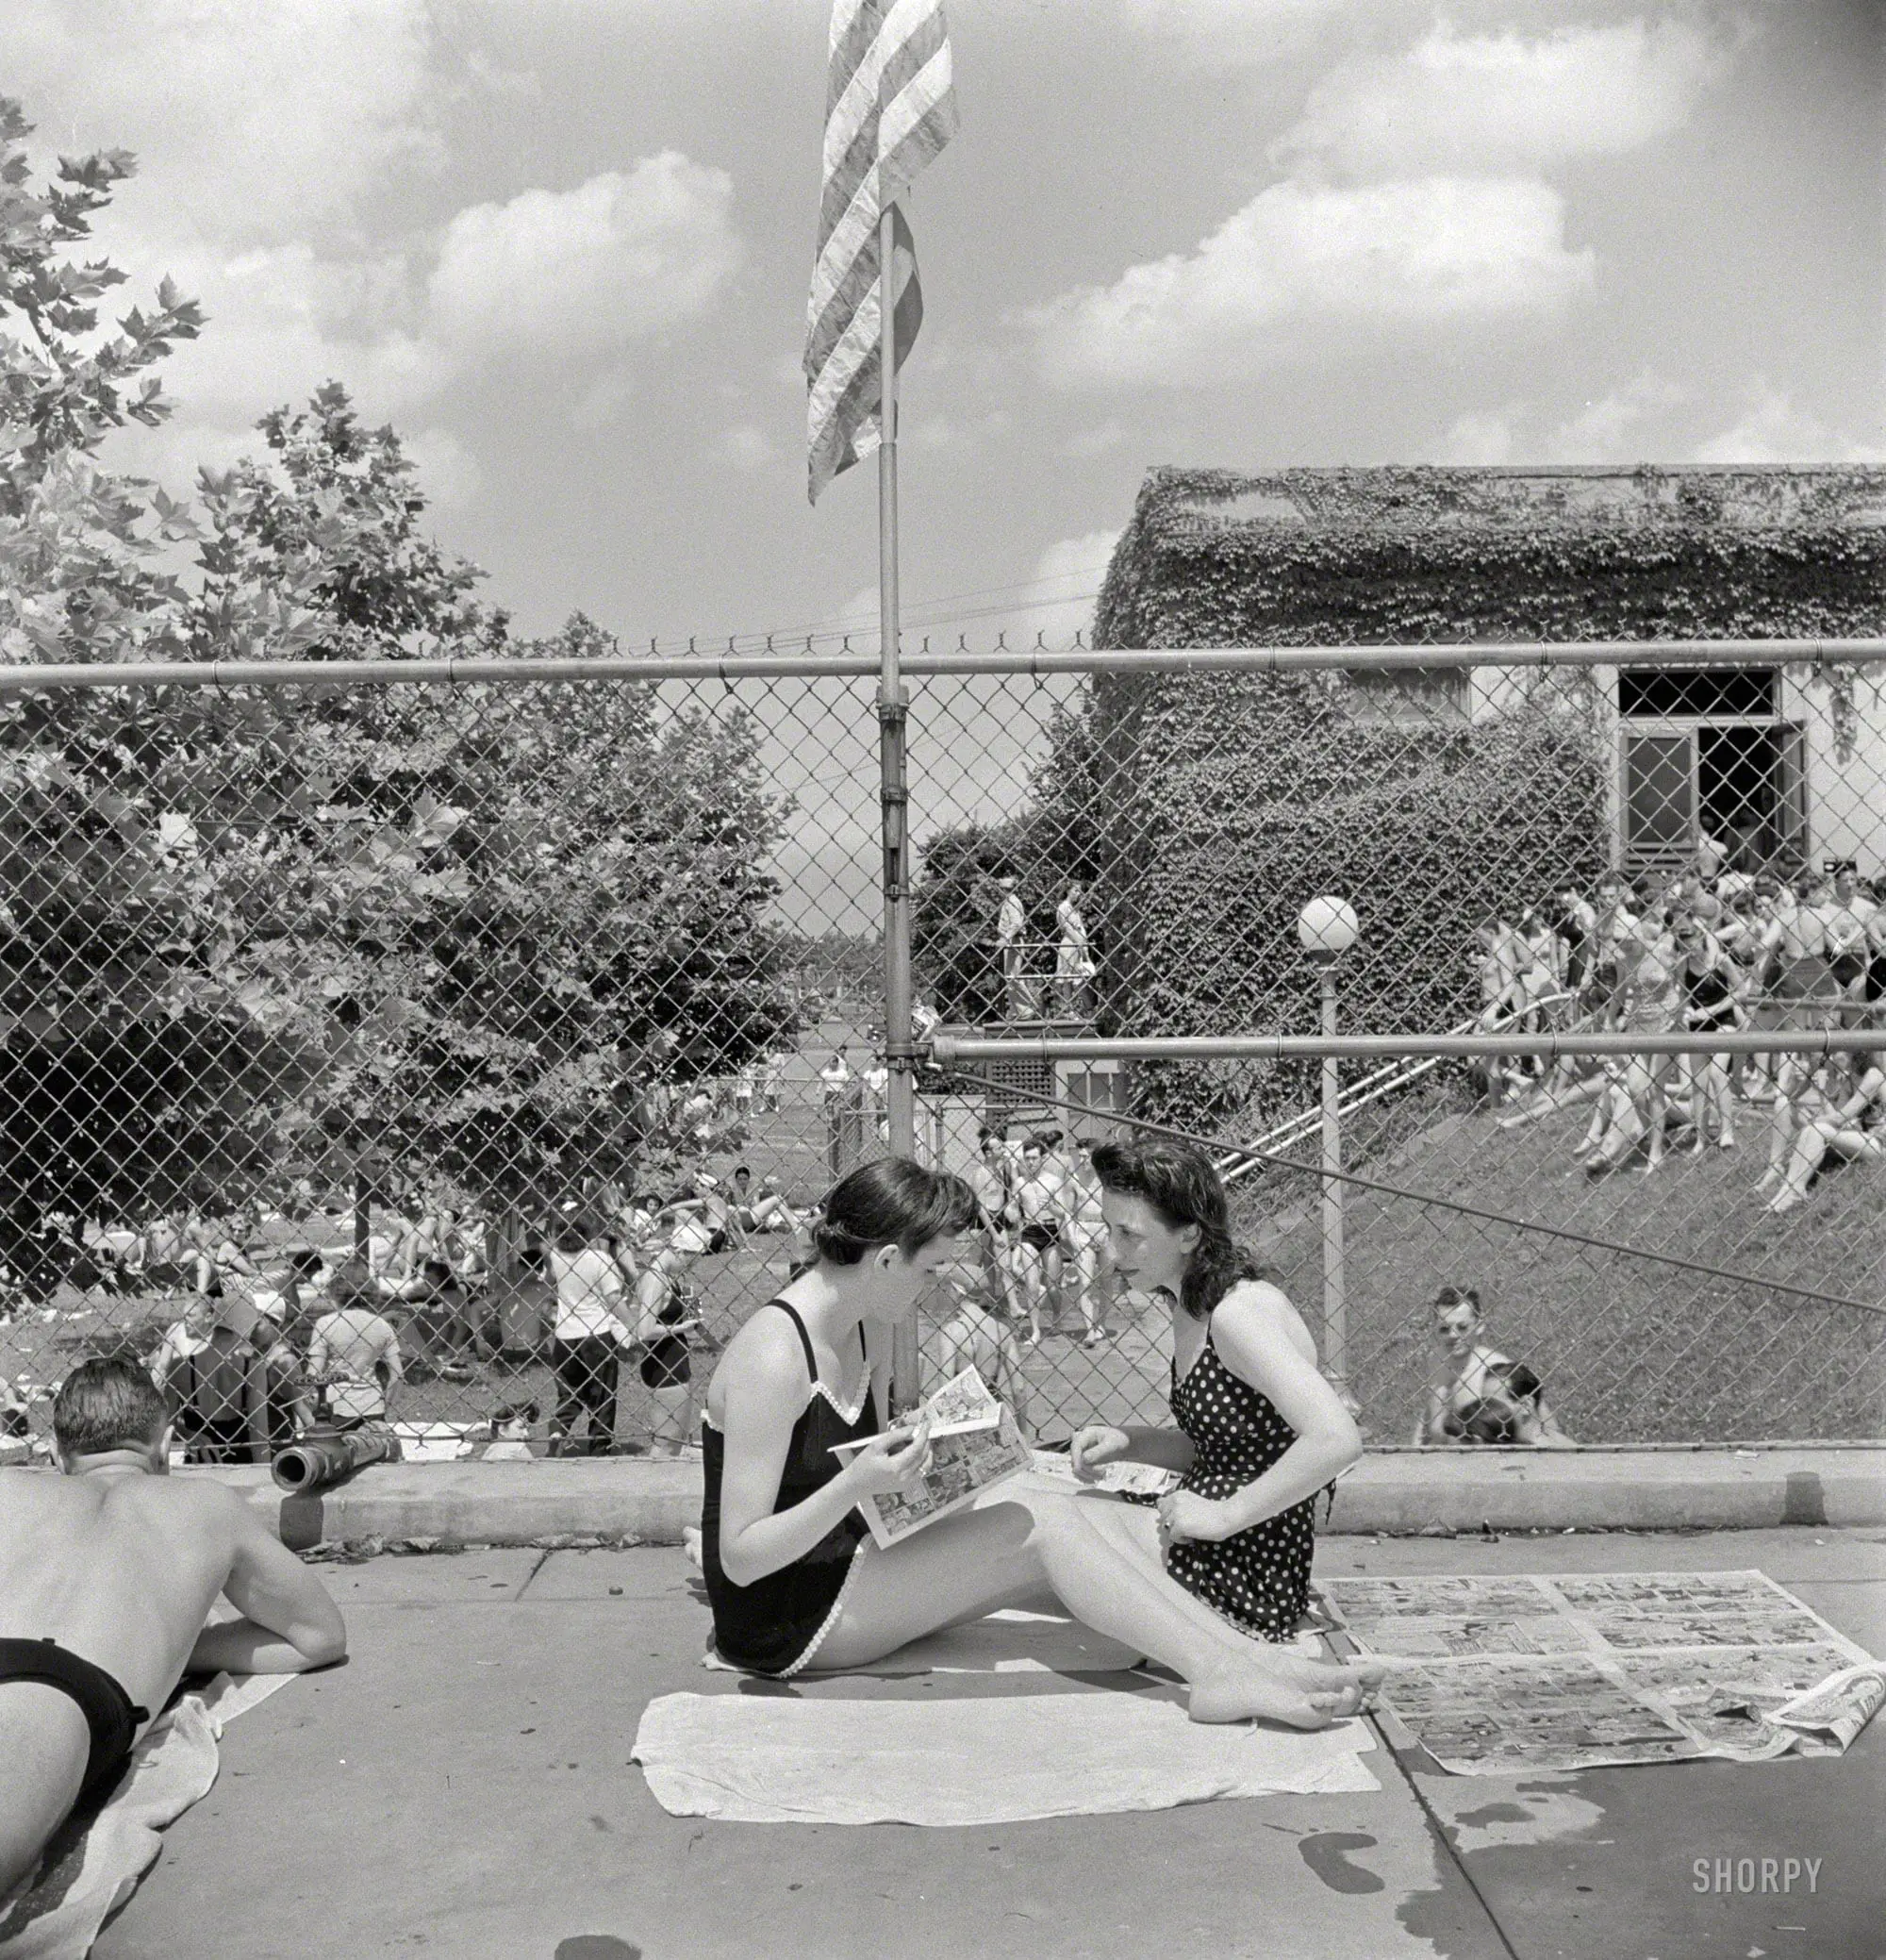 July 1942. Washington, D.C. "Sunday swimmers at the municipal pool." These girls are all about the comics. So where's Superman? Medium format nitrate negative by Marjory Collins for the Office of War Information.